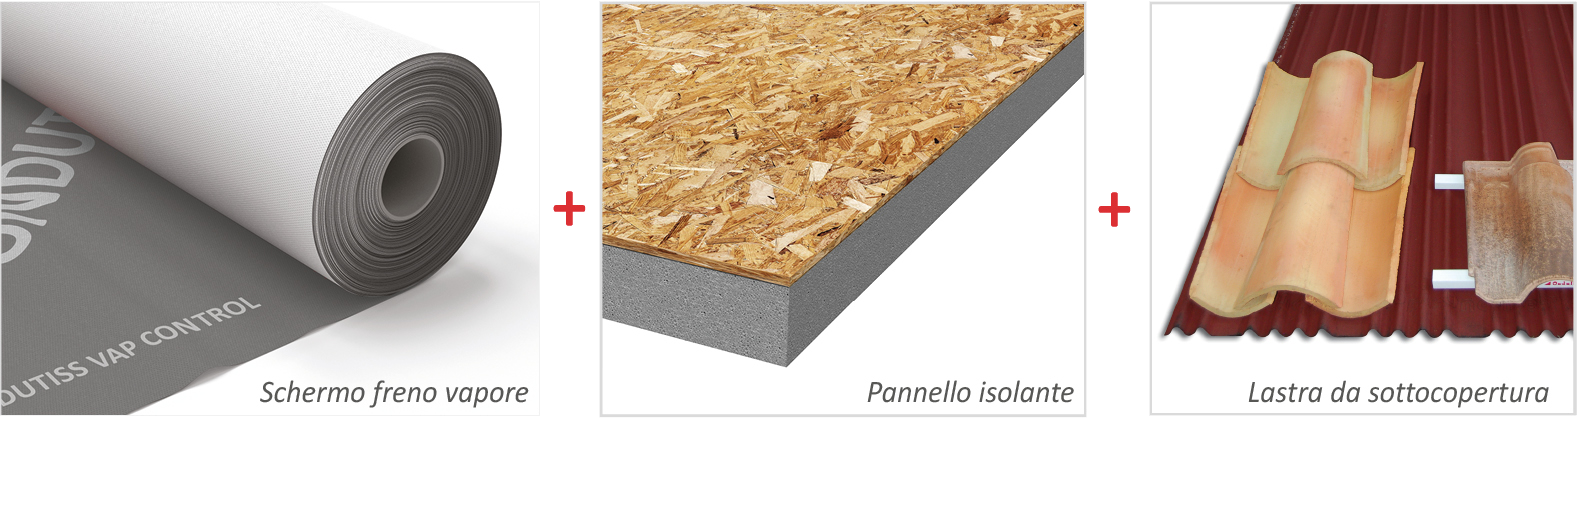 onduline_roofing_system_pro_1.png